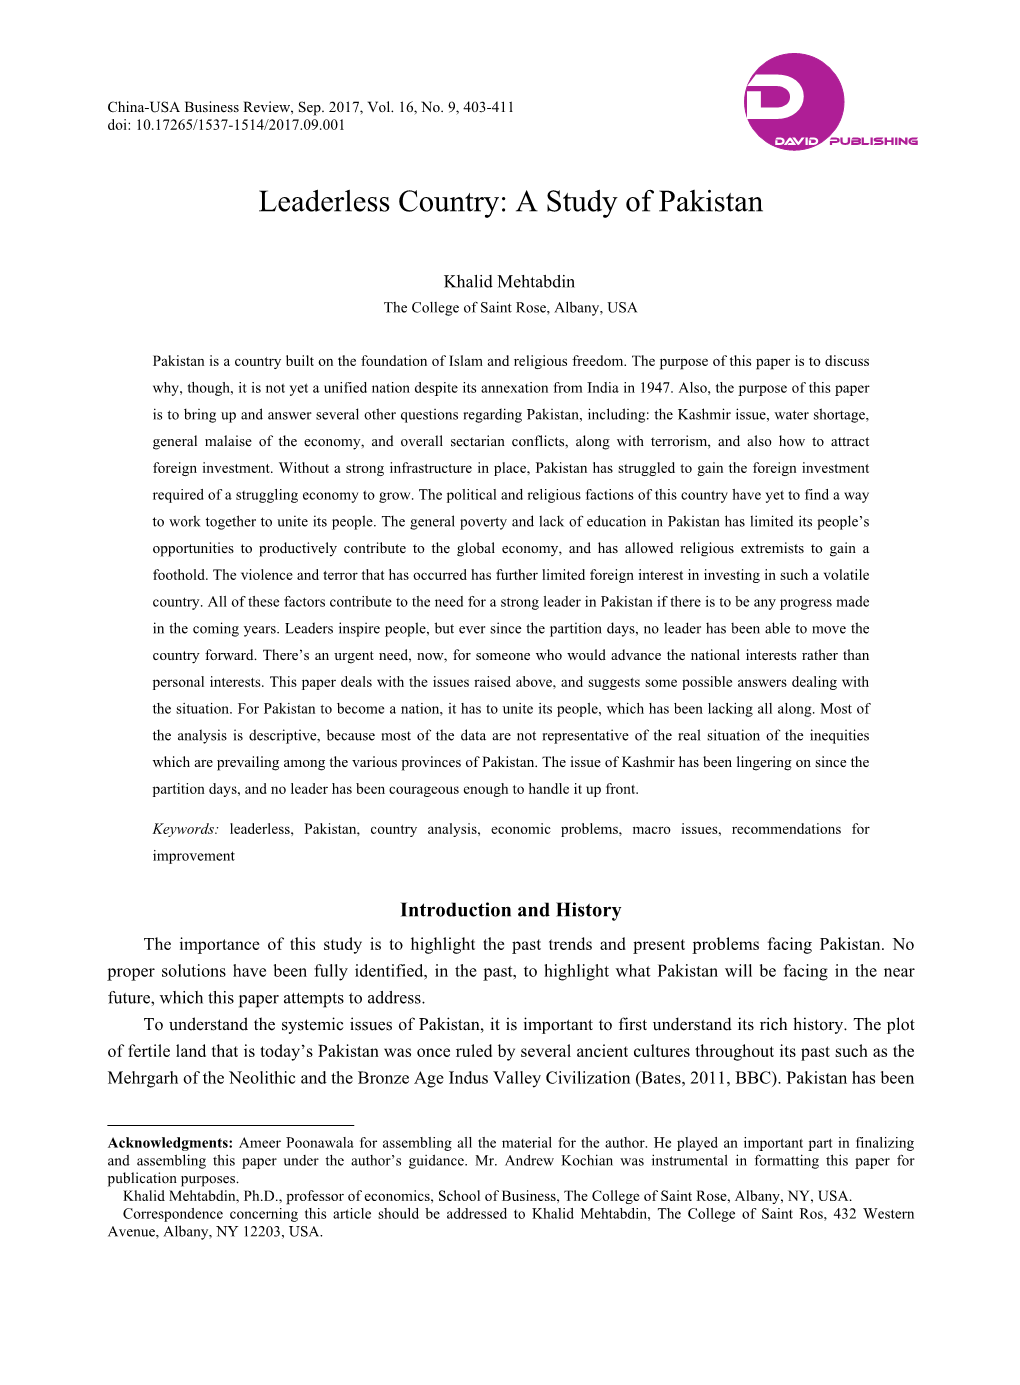 Leaderless Country: a Study of Pakistan